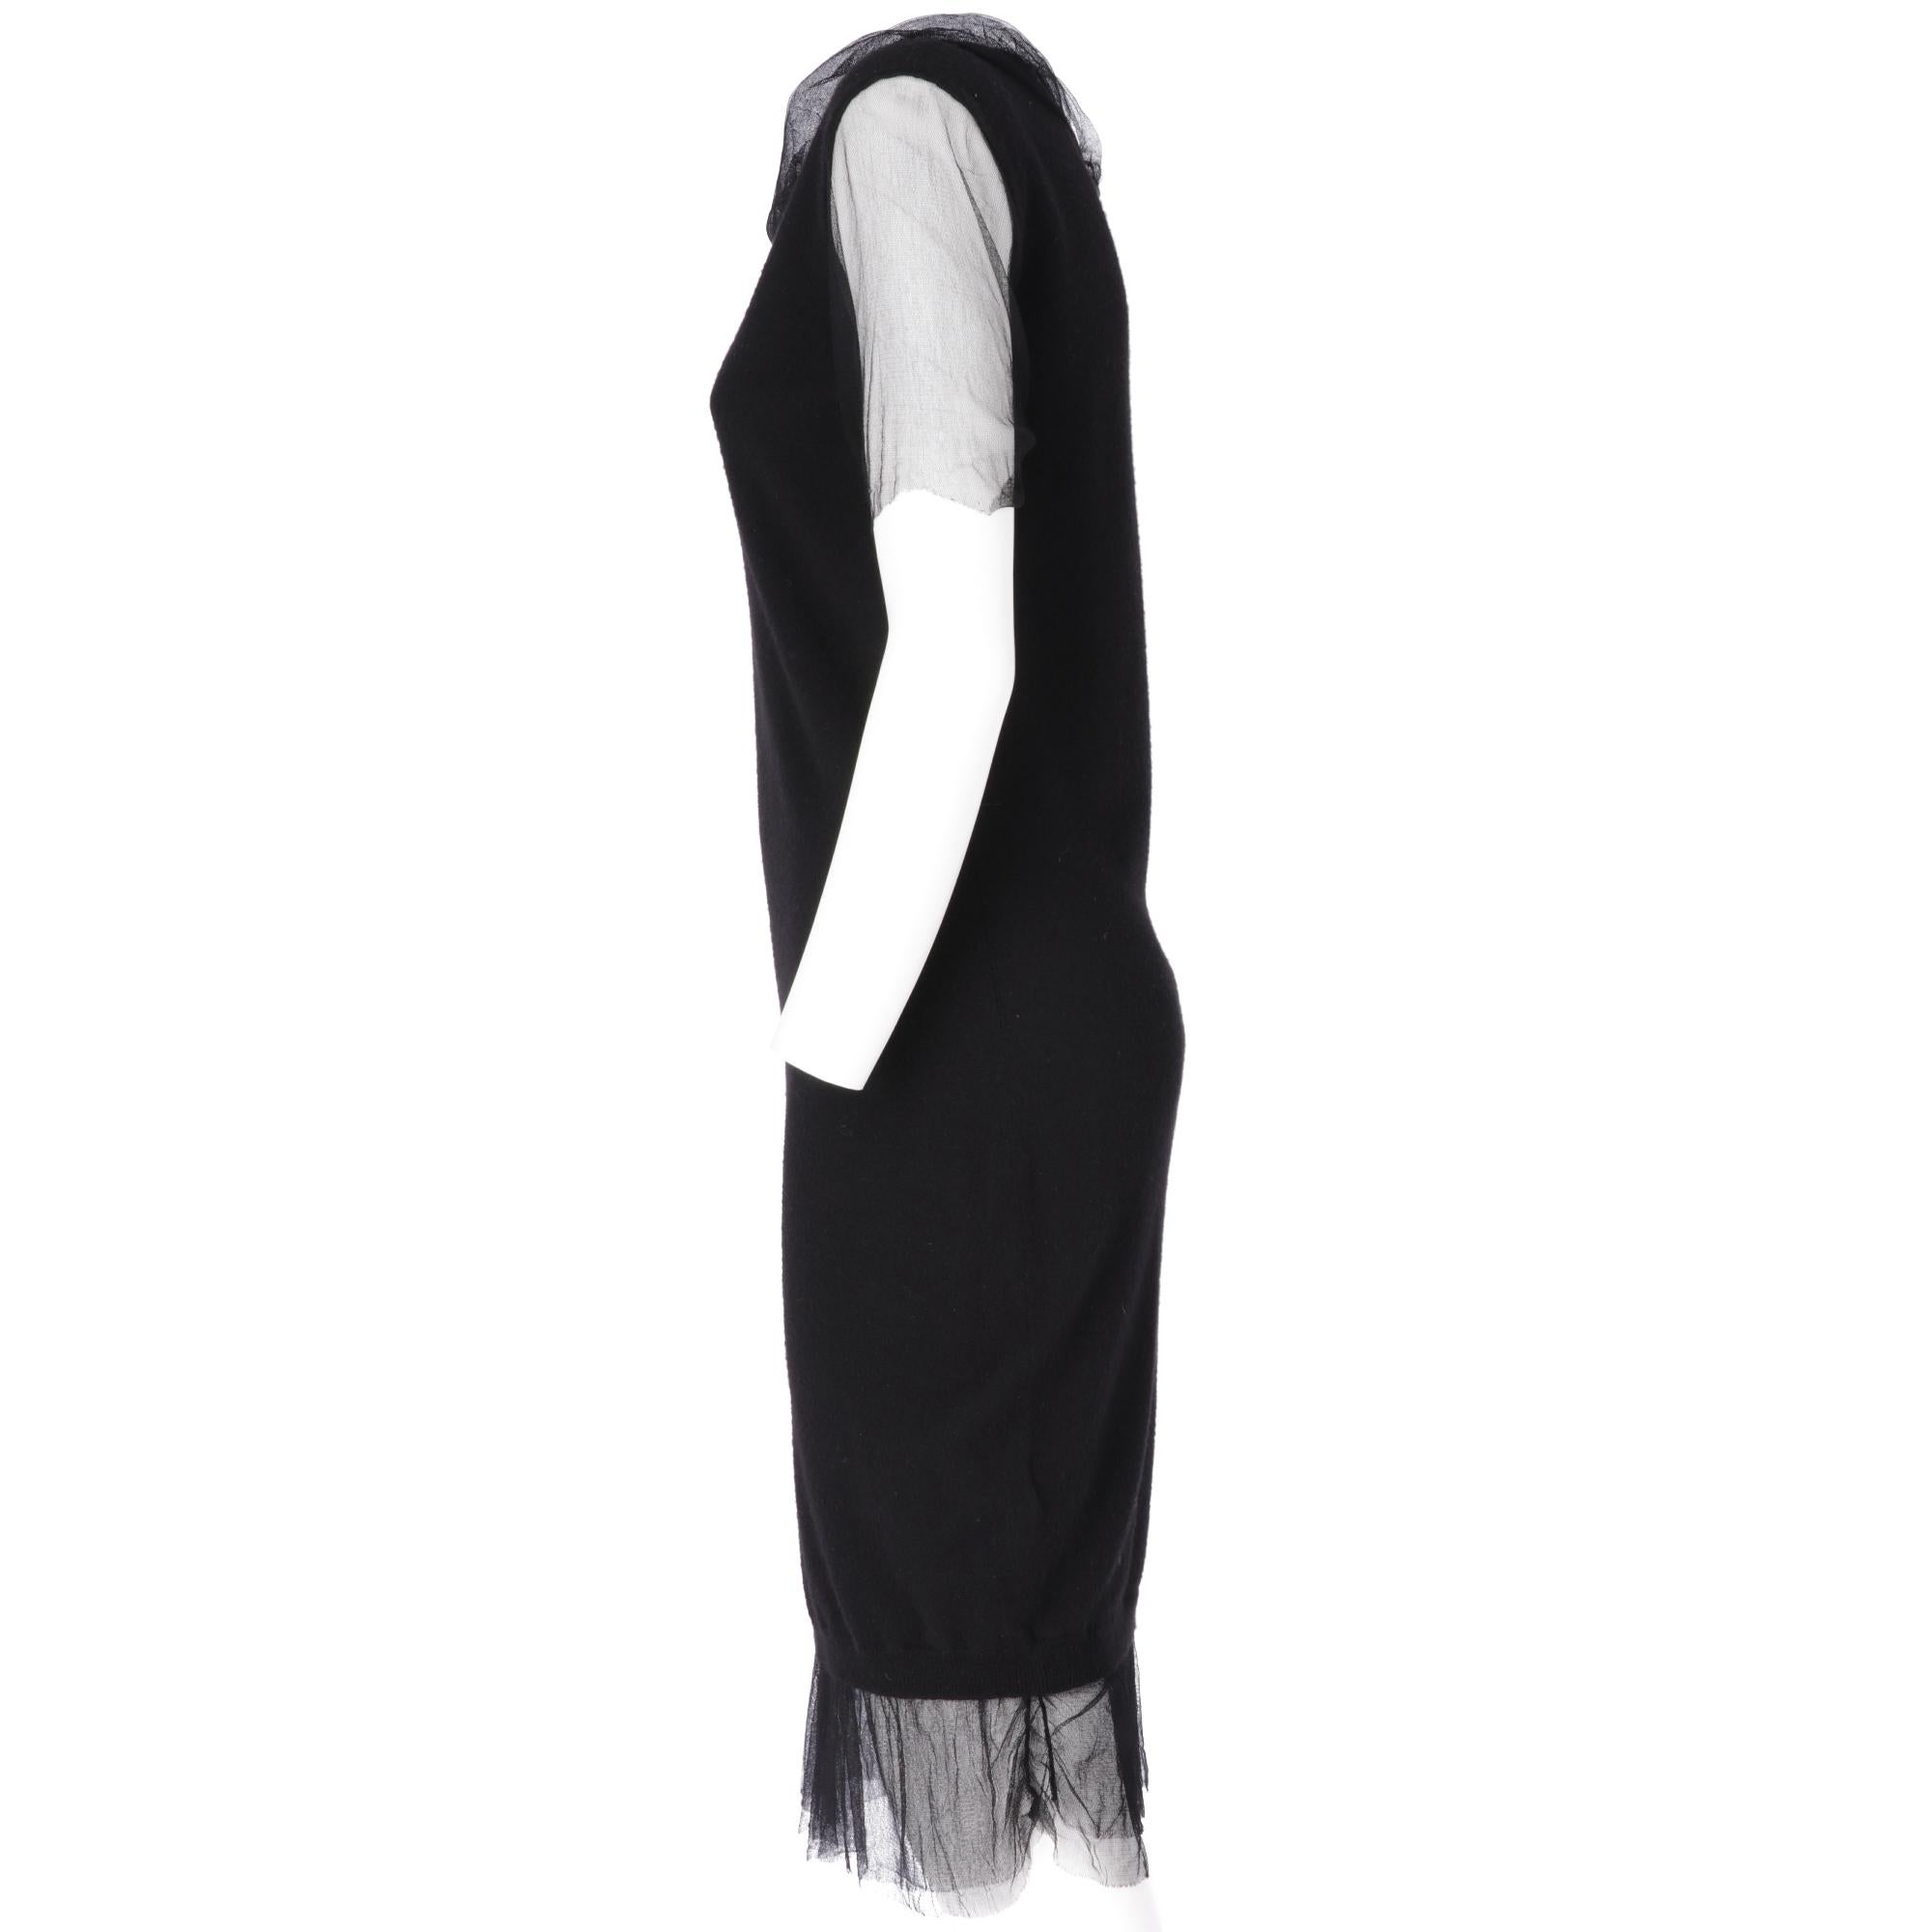 Lanvin black midi dress in virgin wool, round neck, short tulle sleeves, tulle layer applied on the hem and on the neck.

Years: Winter 2009

Made in Italy

Size: M

Linear measures

Height: 103 cm
Bust: 44 cm 
Waist: 41 cm
Shoulders: 45 cm 